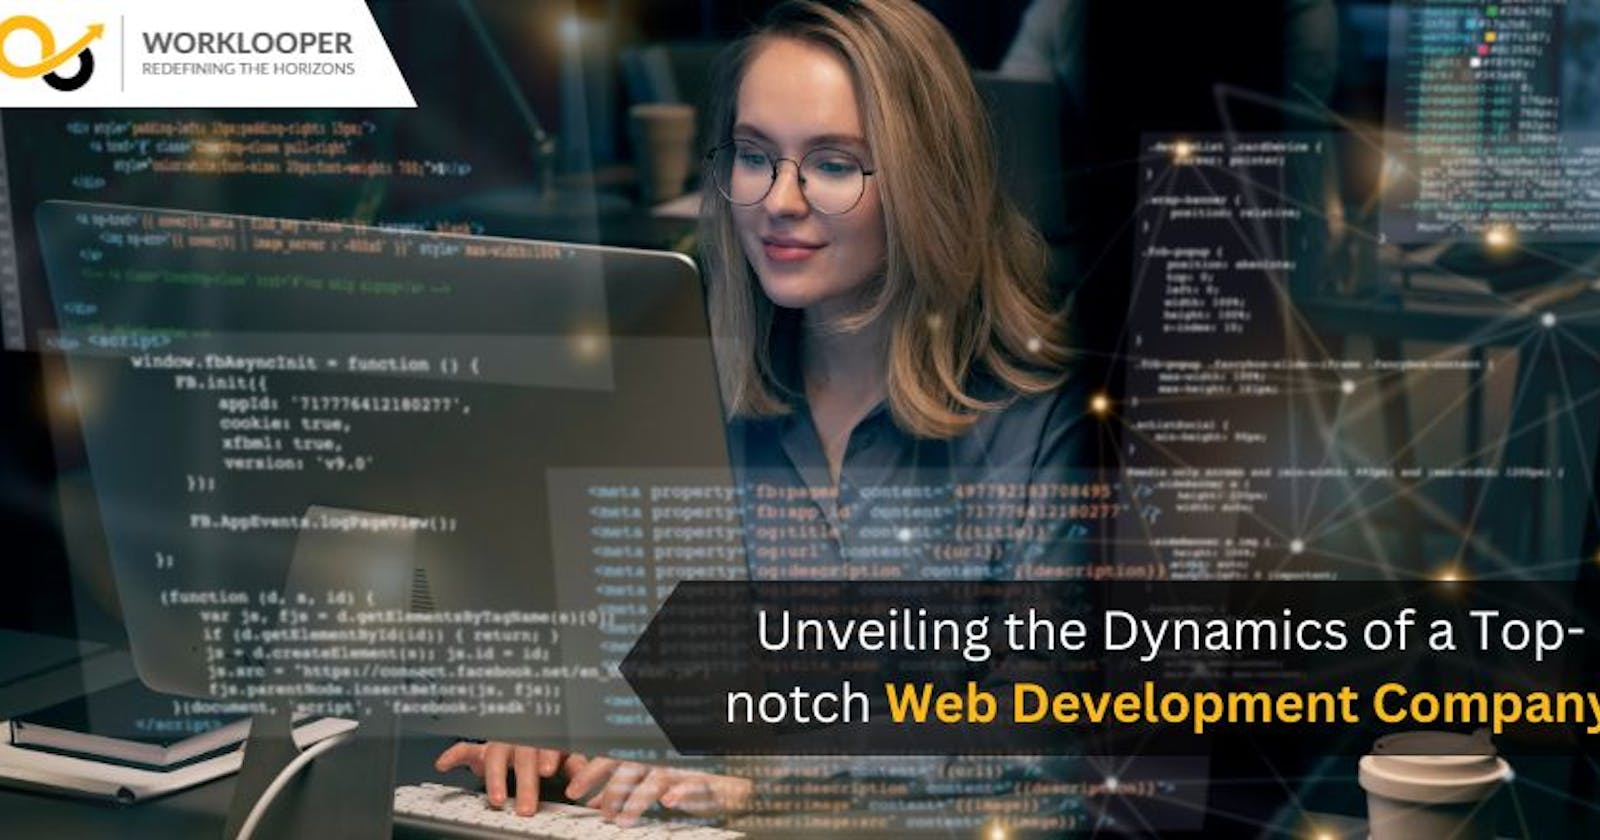 Unveiling the Dynamics of a Top-notch Web Development Company